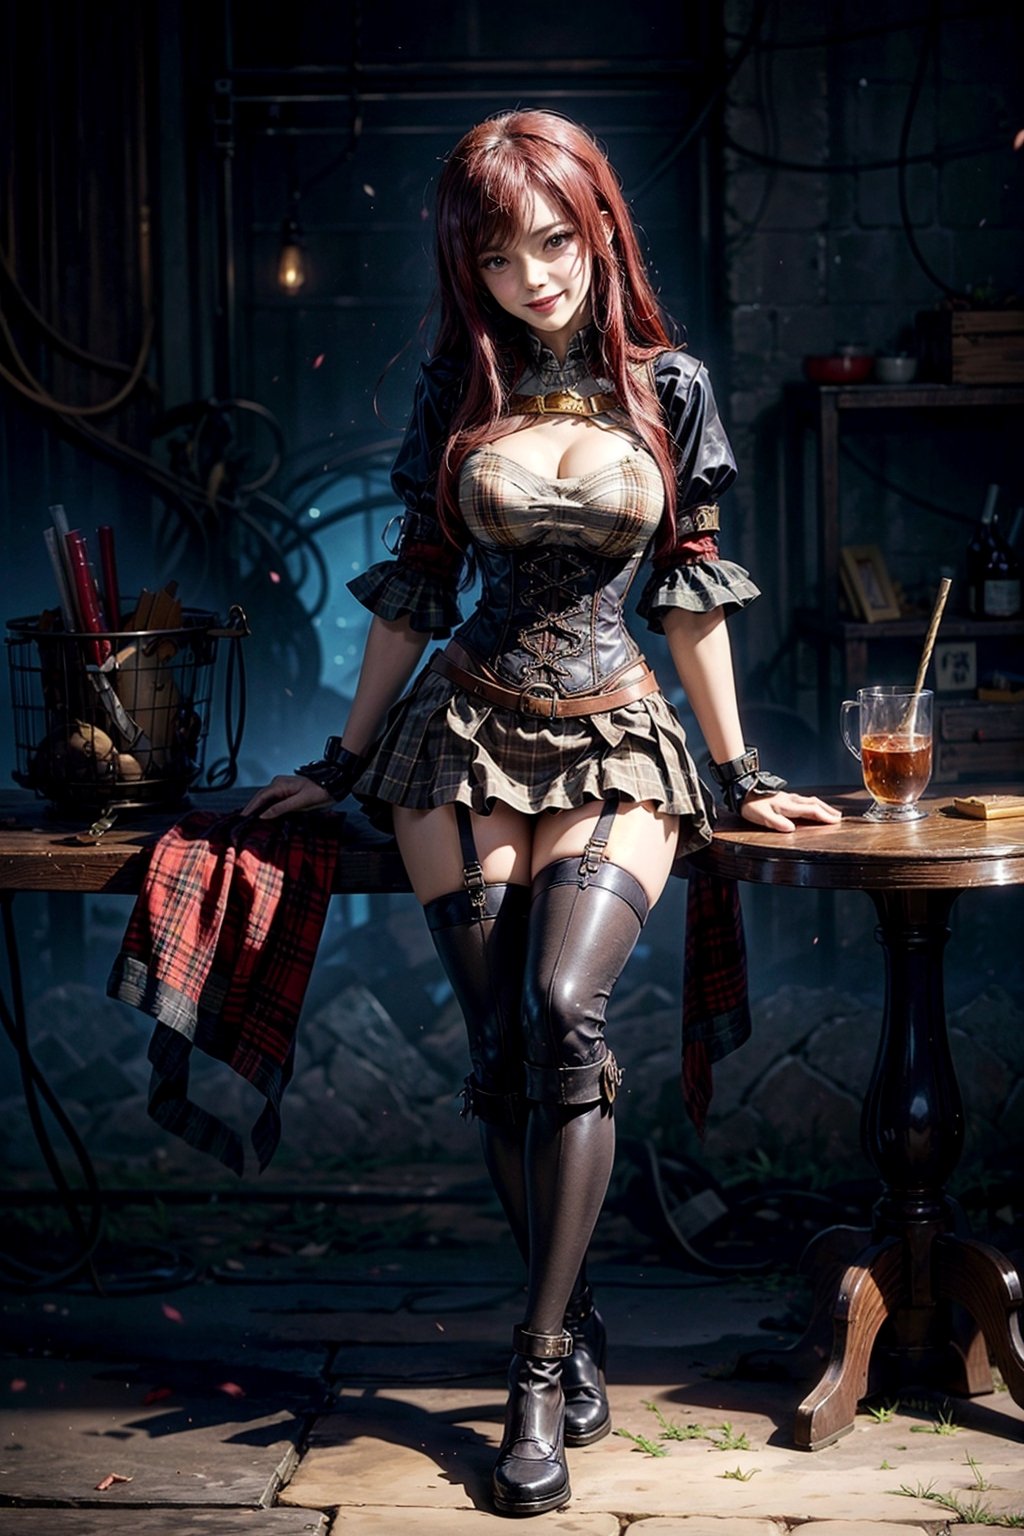 
masterpiece, high resolution, best quality, 1 girl alone, full body, schoolgirl steampunk uniform with red tartan miniskirt and a leather corset with a strong Steampunk design, smile, Japanese old town, Komorebi, erza scarlet,fairy tail